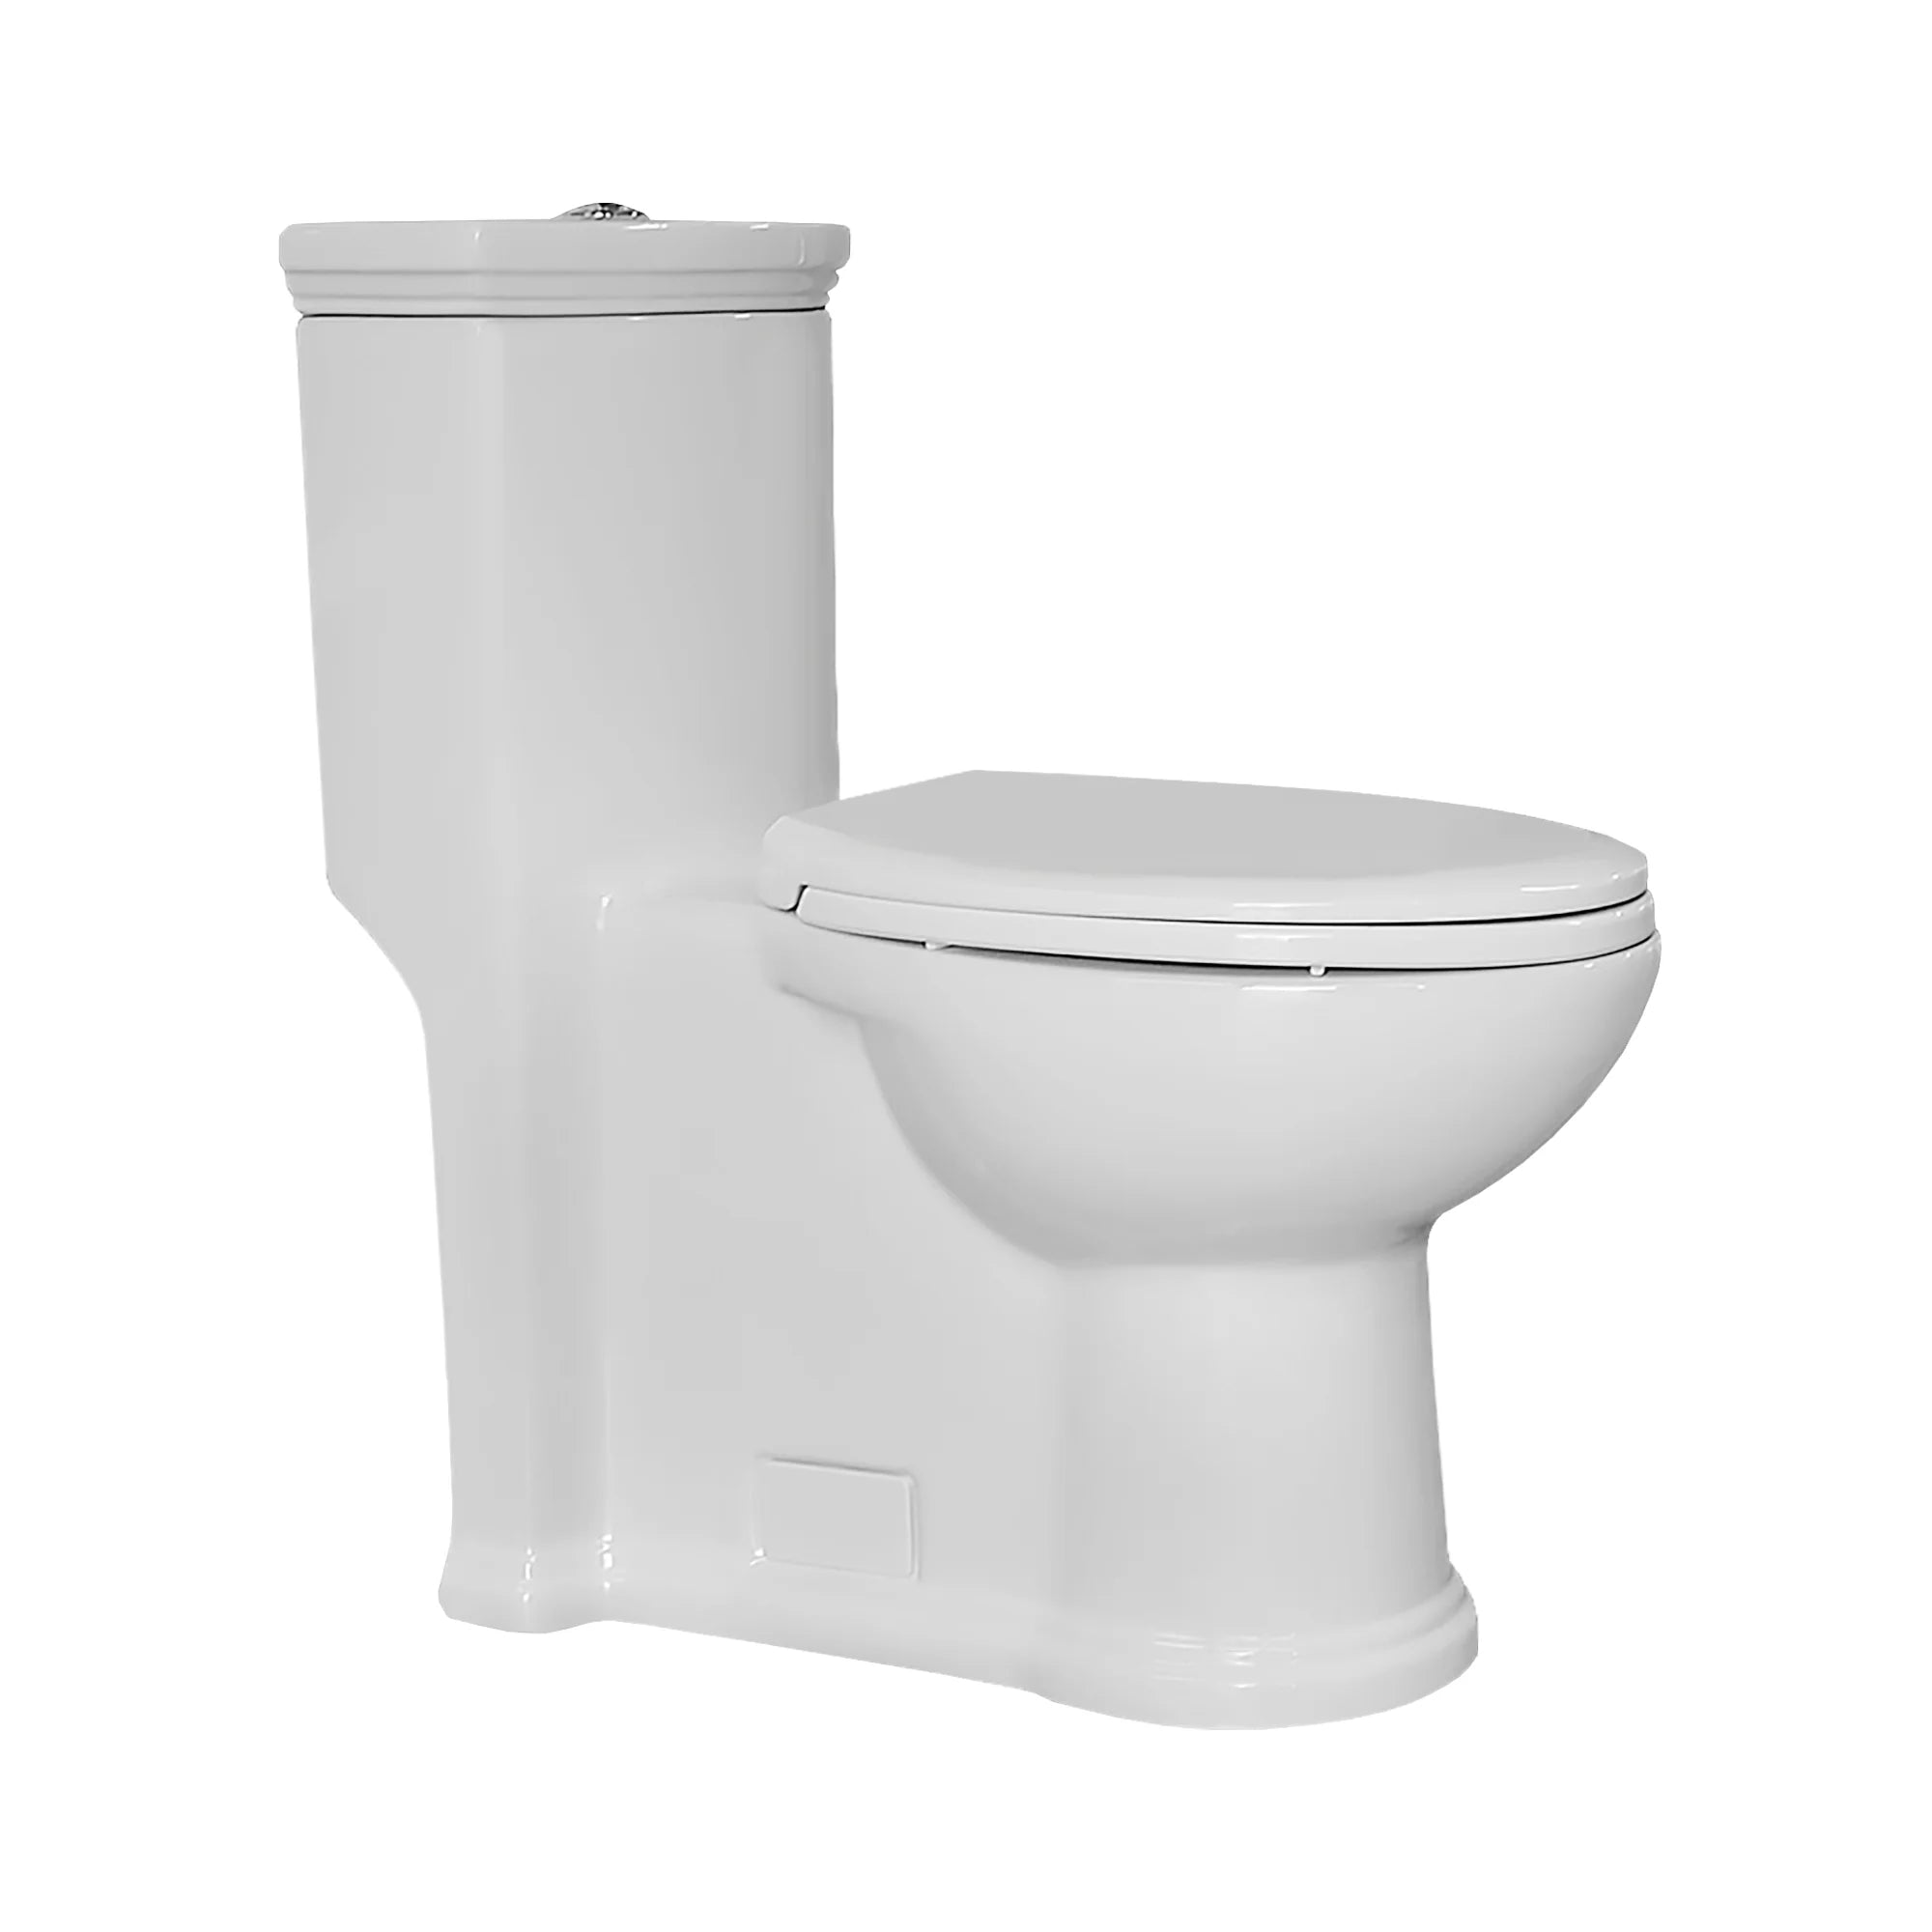 WHITEHAUS Magic Flush Eco-friendly One Piece Toilet With A Siphonic Action Dual Flush System, Elongated Bowl 1.3/0.9 Gpf - Bathroom Design Center